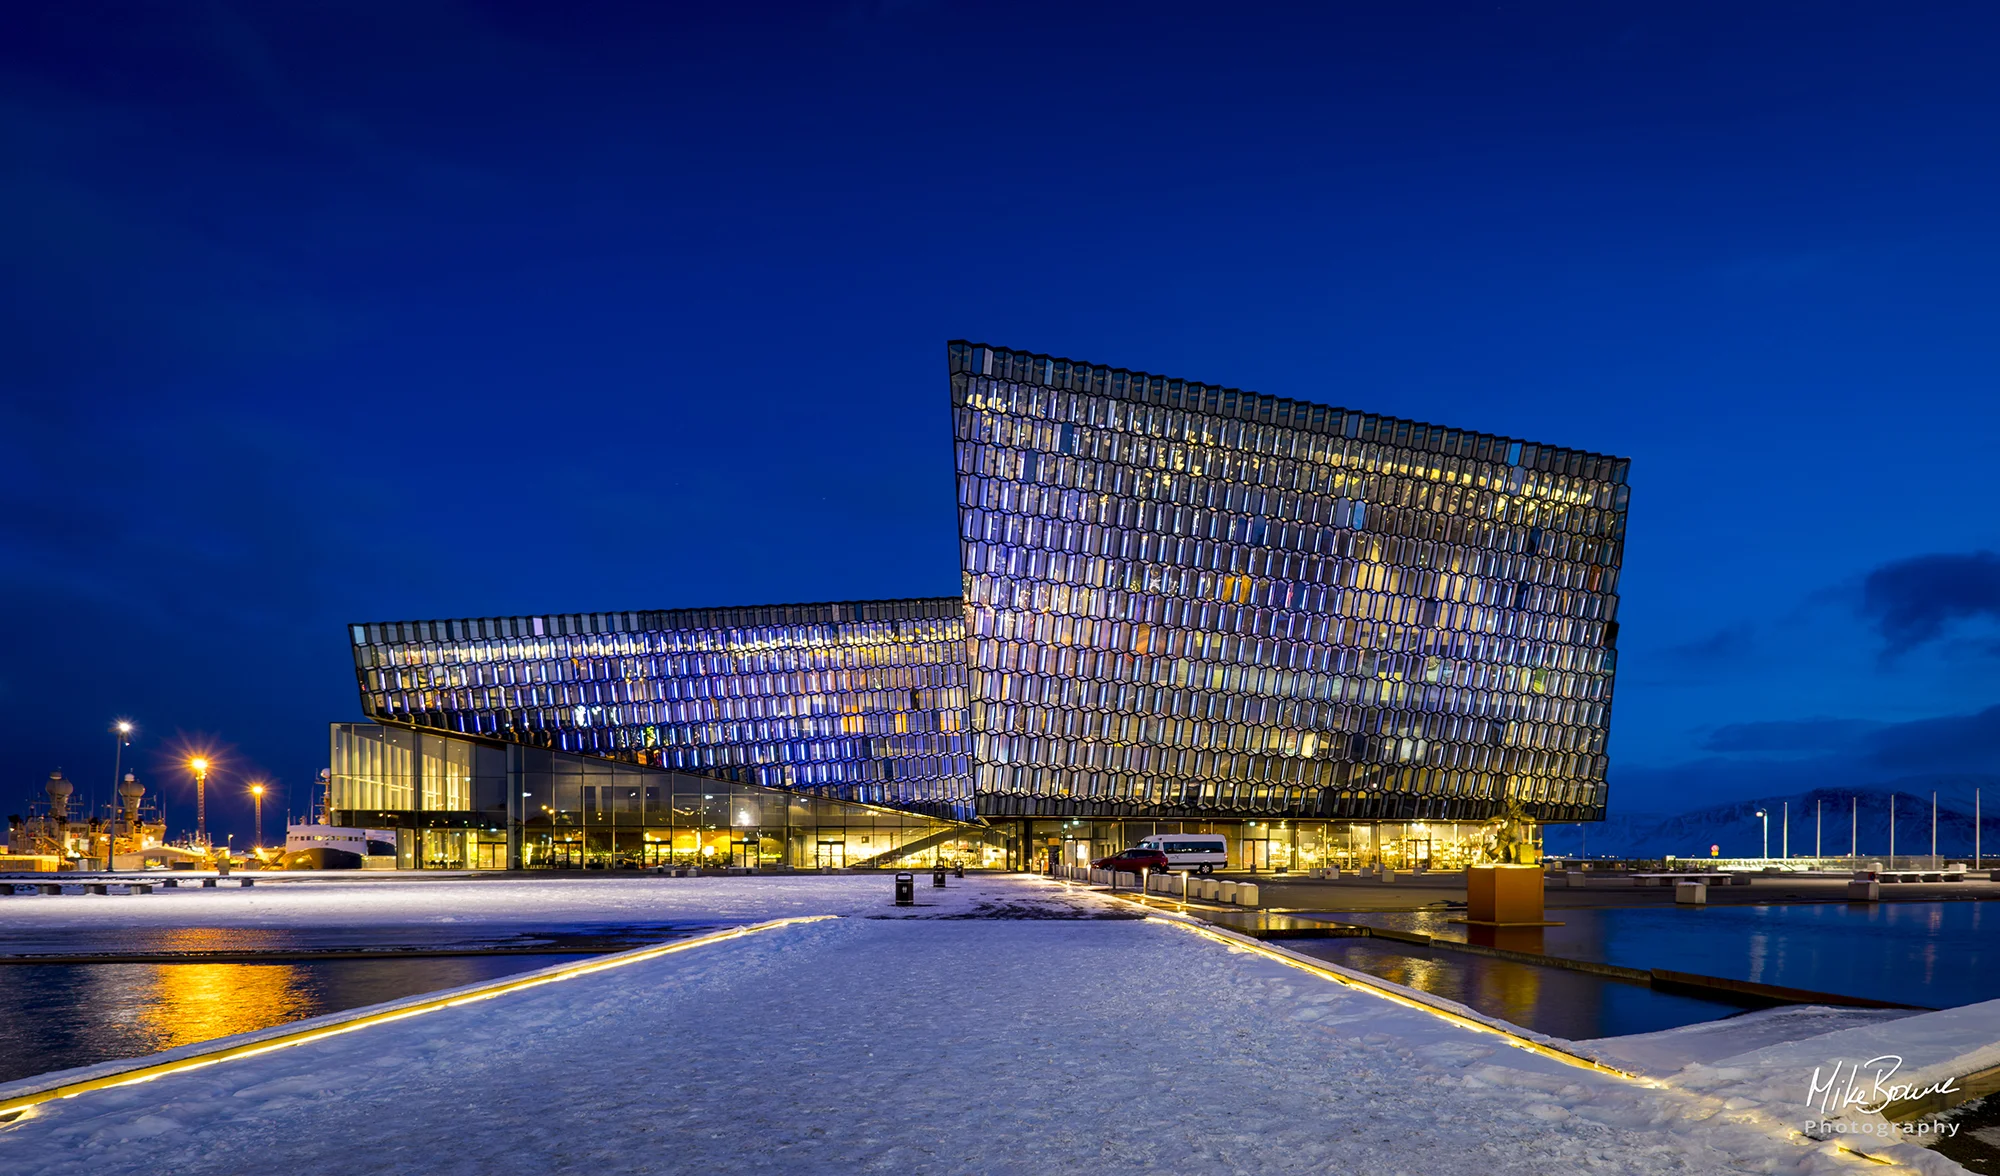 Harpa concert hall in Reykjavik, Iceland with blue twilight sky and snow on footpath to entrance